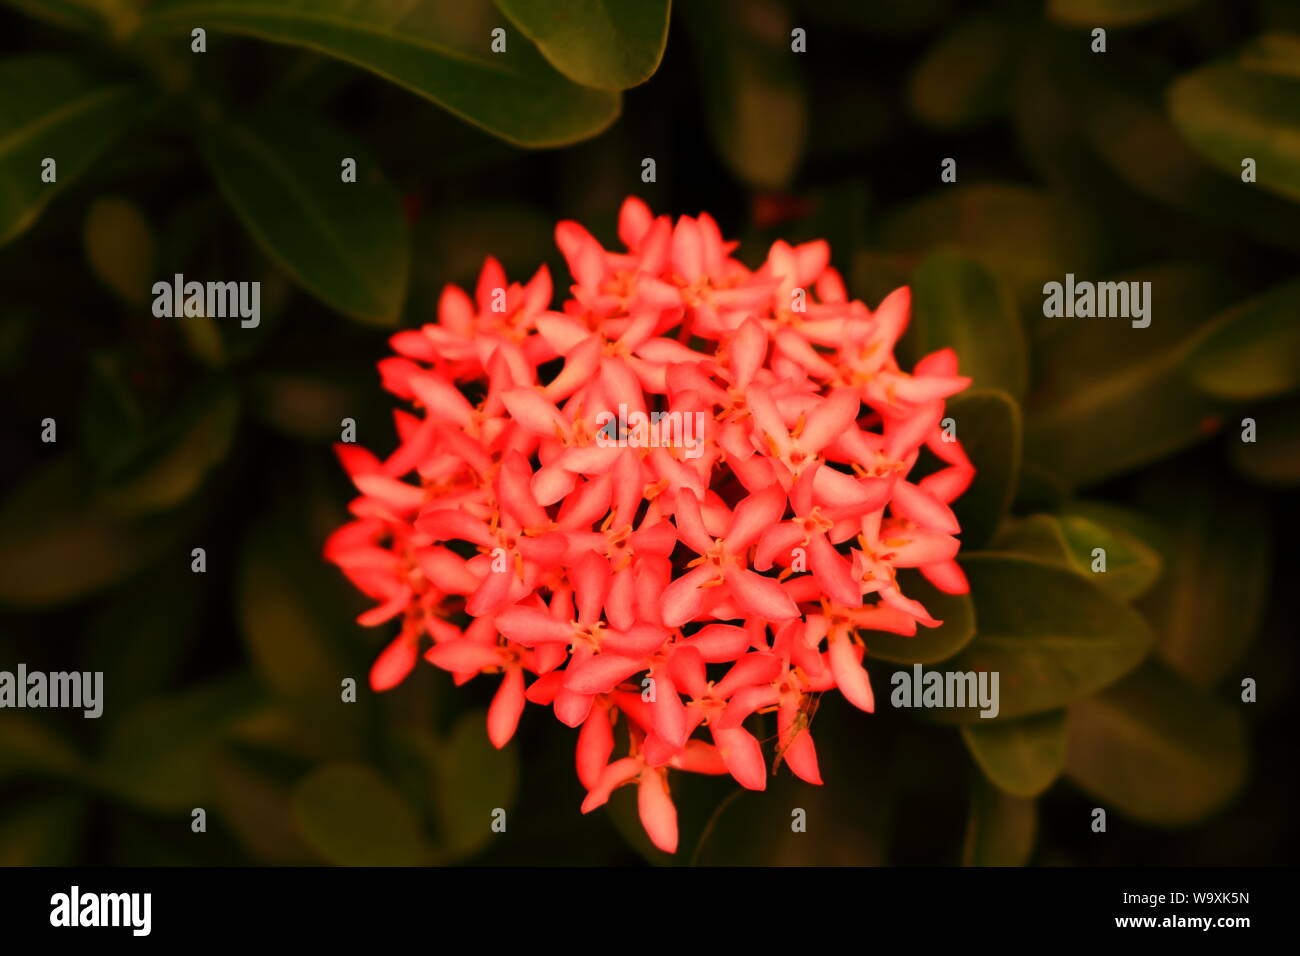 Closeup of pink ixora or spike flowers blooming in garden, selective focus Stock Photo